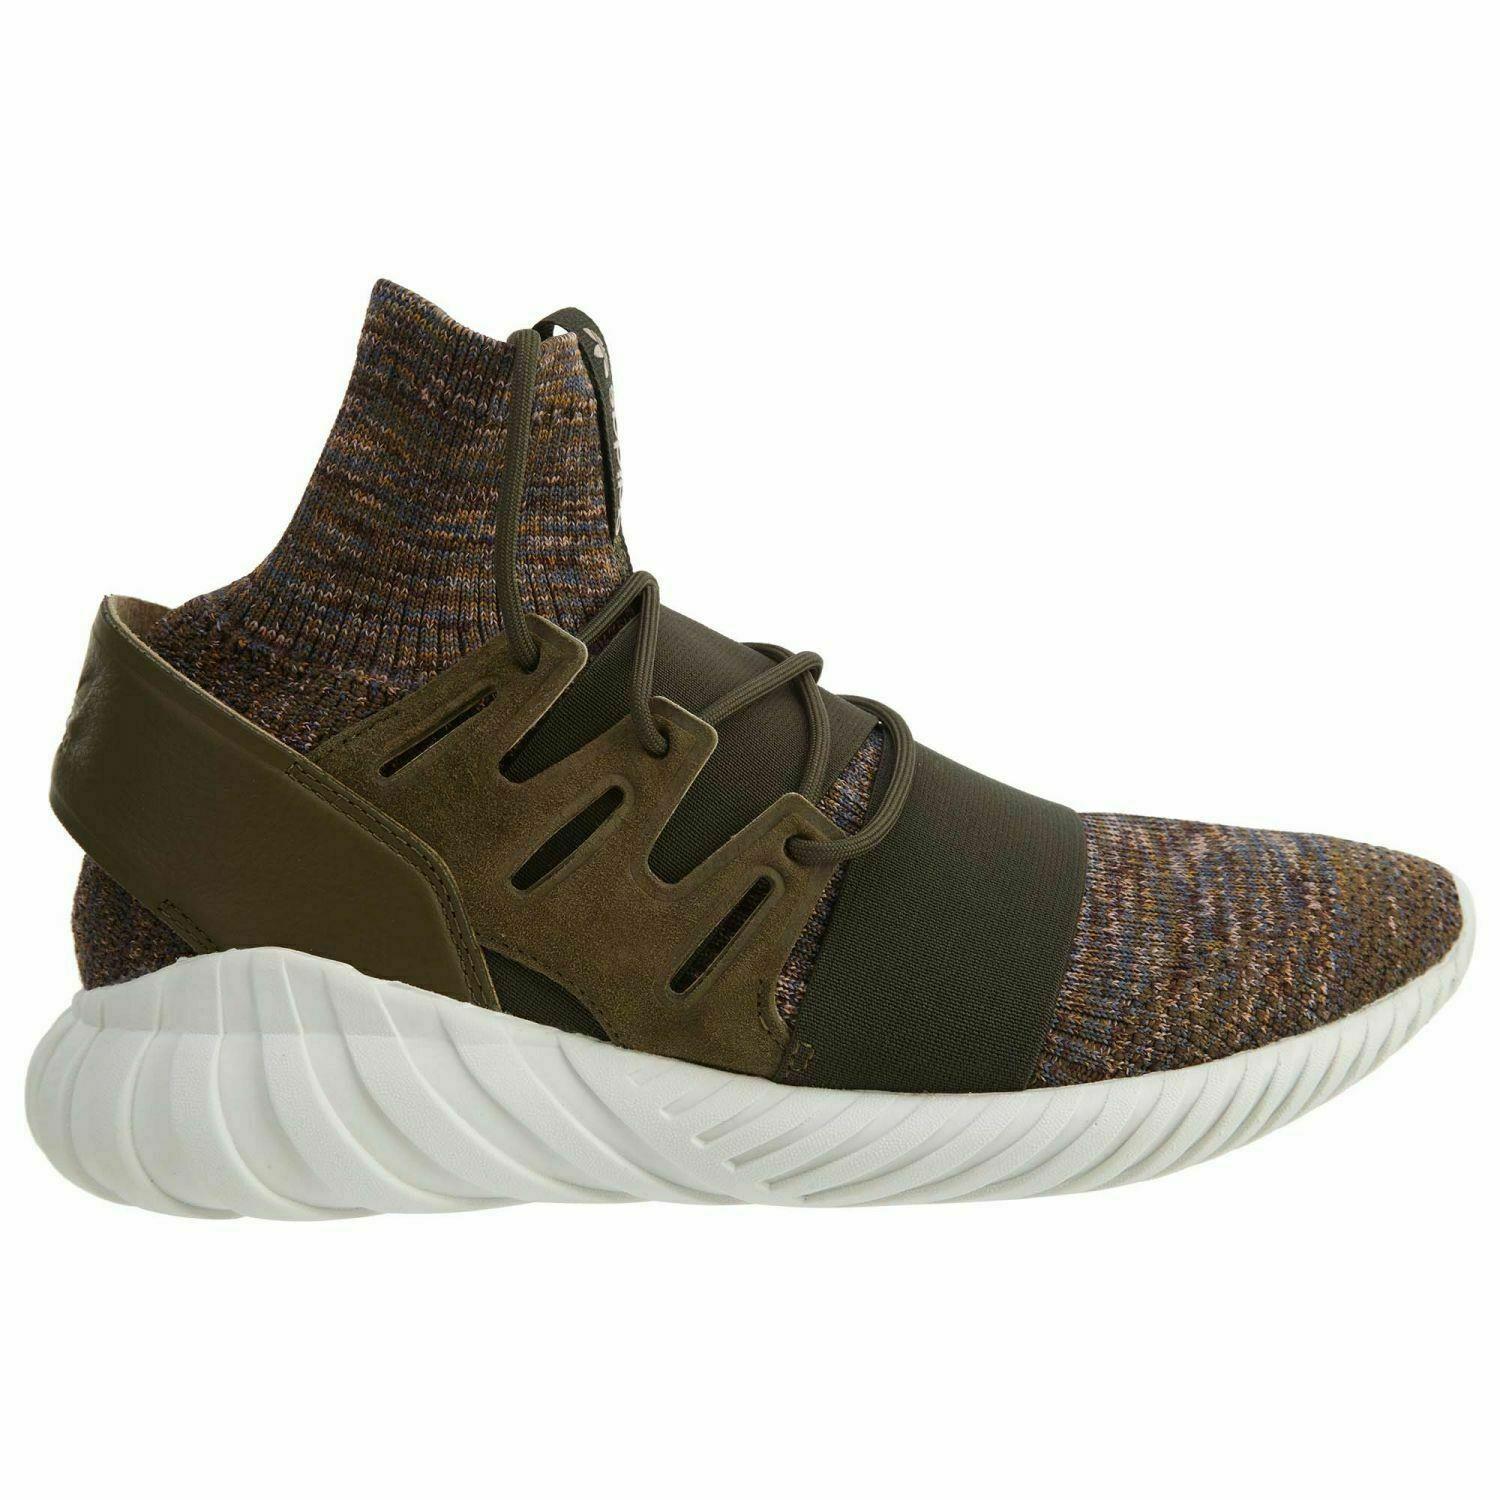 Adidas Tubular Doom PK Mens BY3551 Trace Olive Brown Primeknit Shoes Size 8